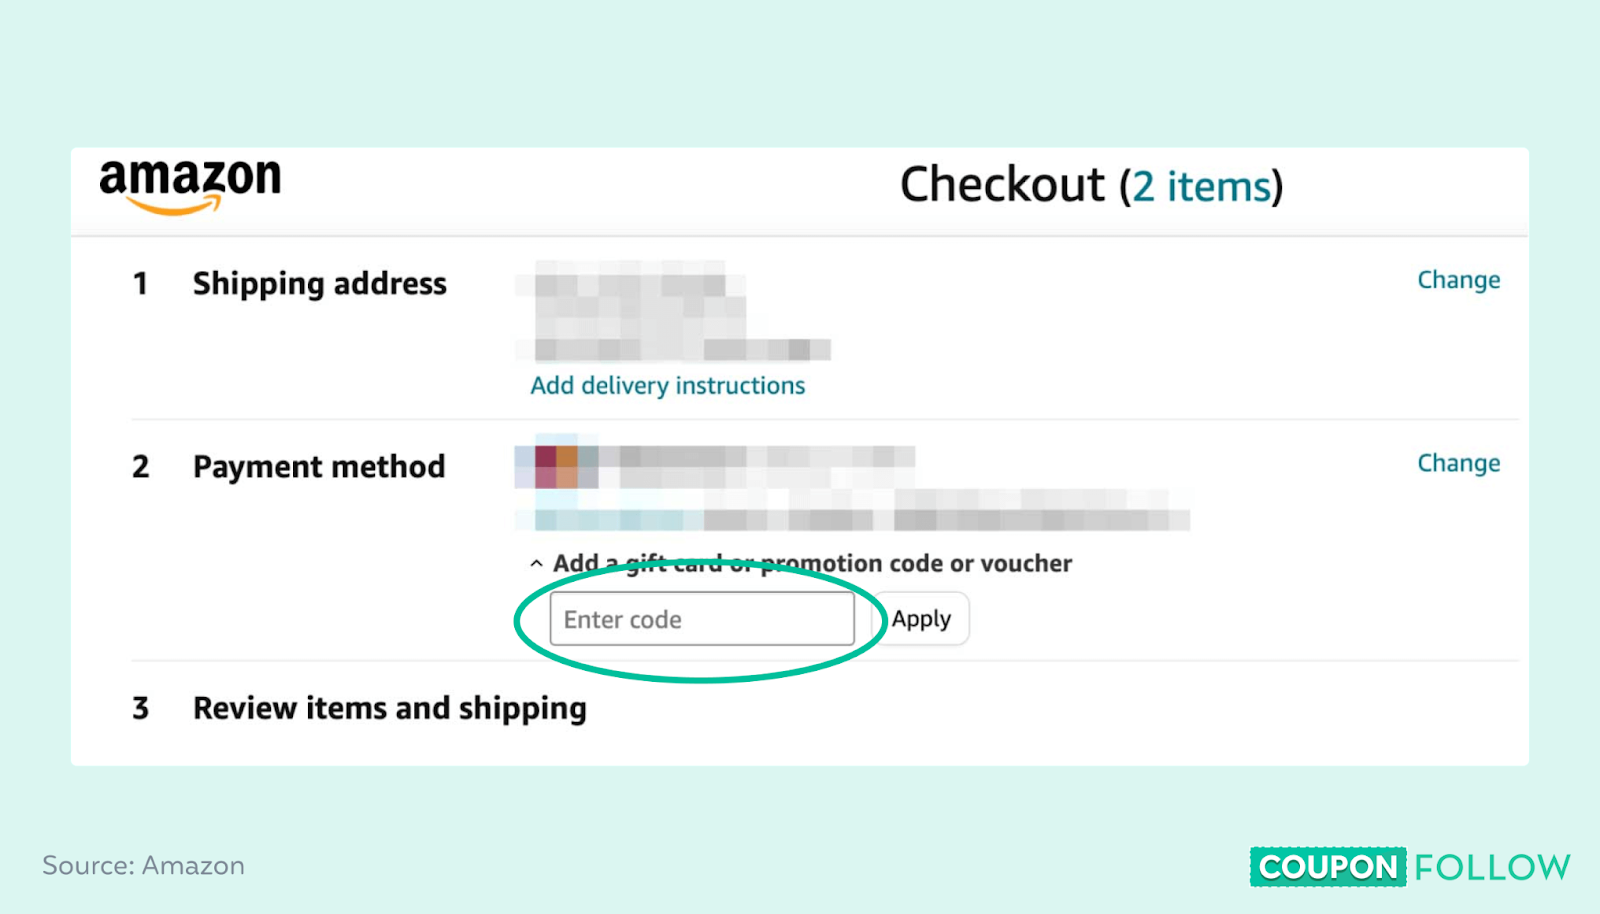 An image showing where to enter a coupon code